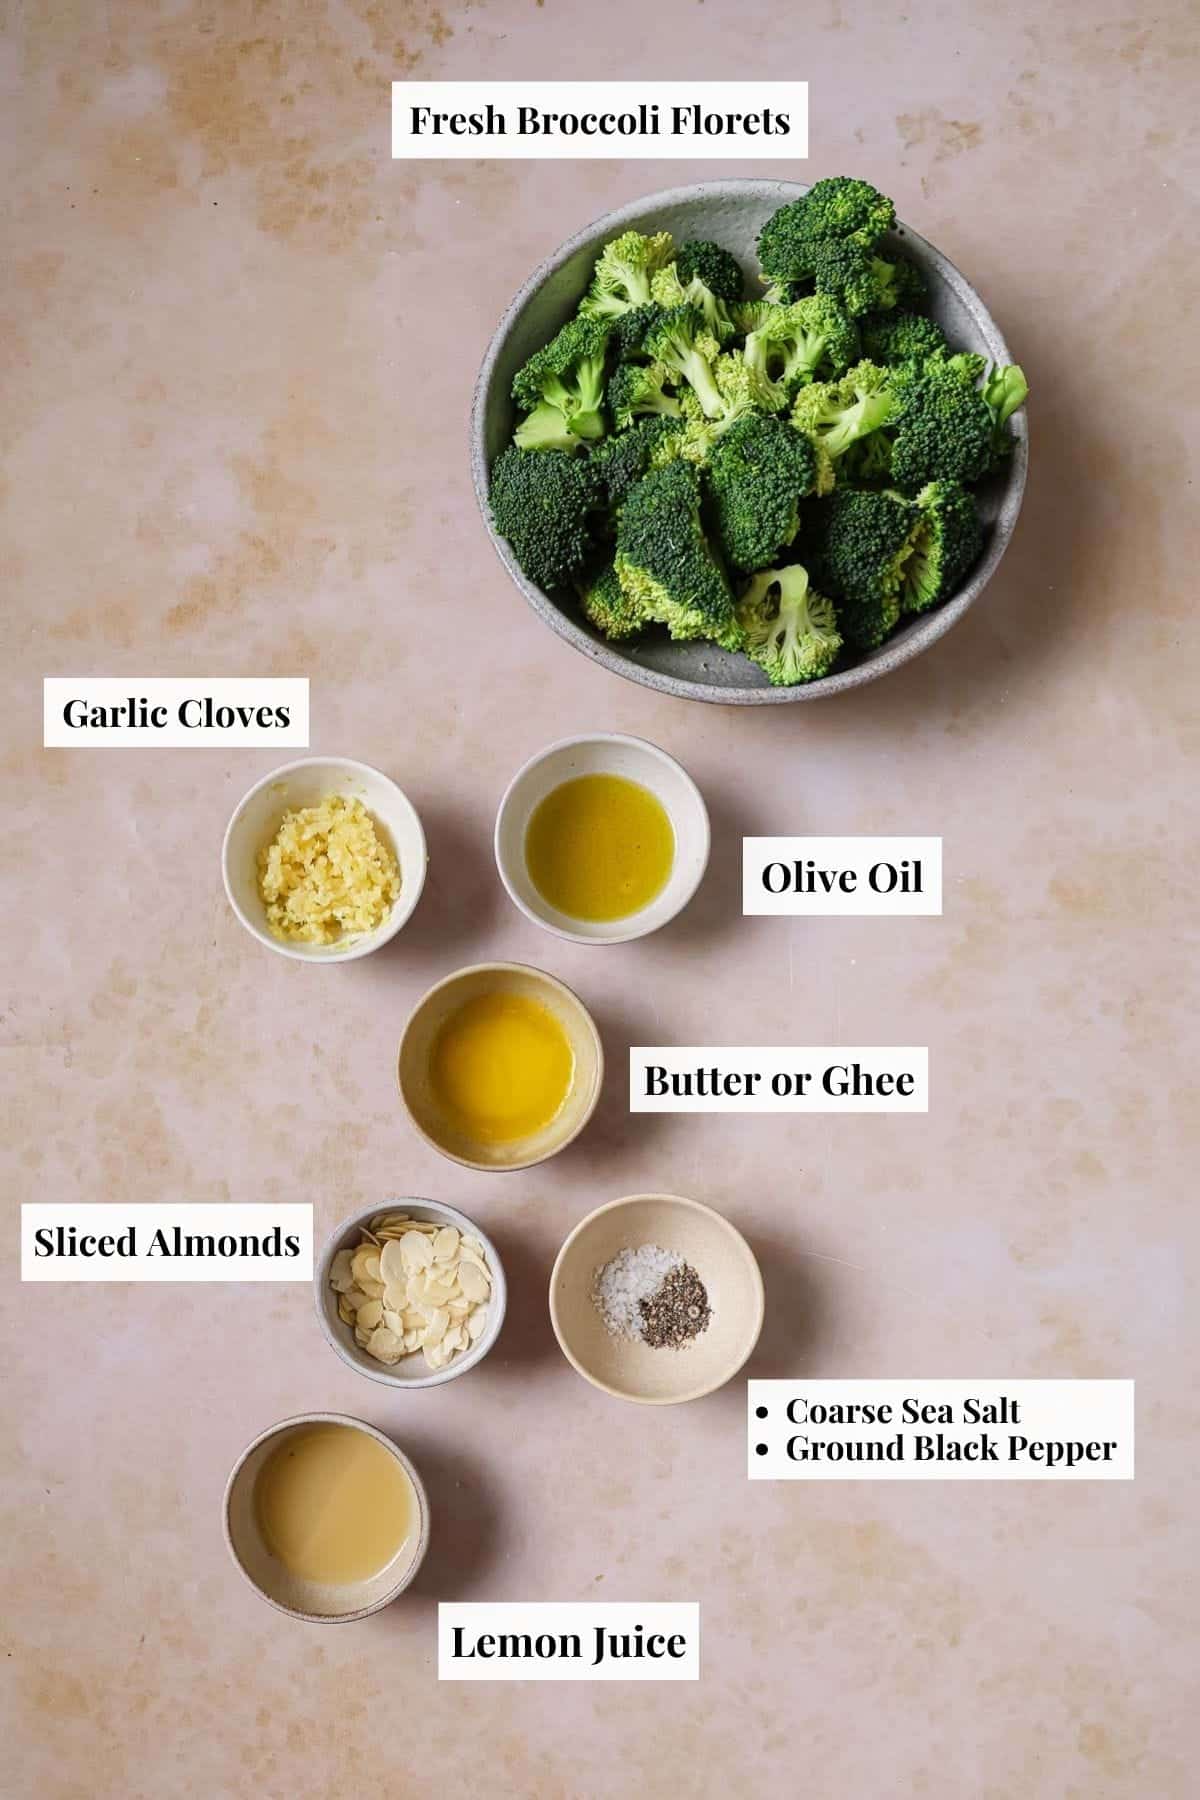 Ingredients used for buttered garlic broccoli.